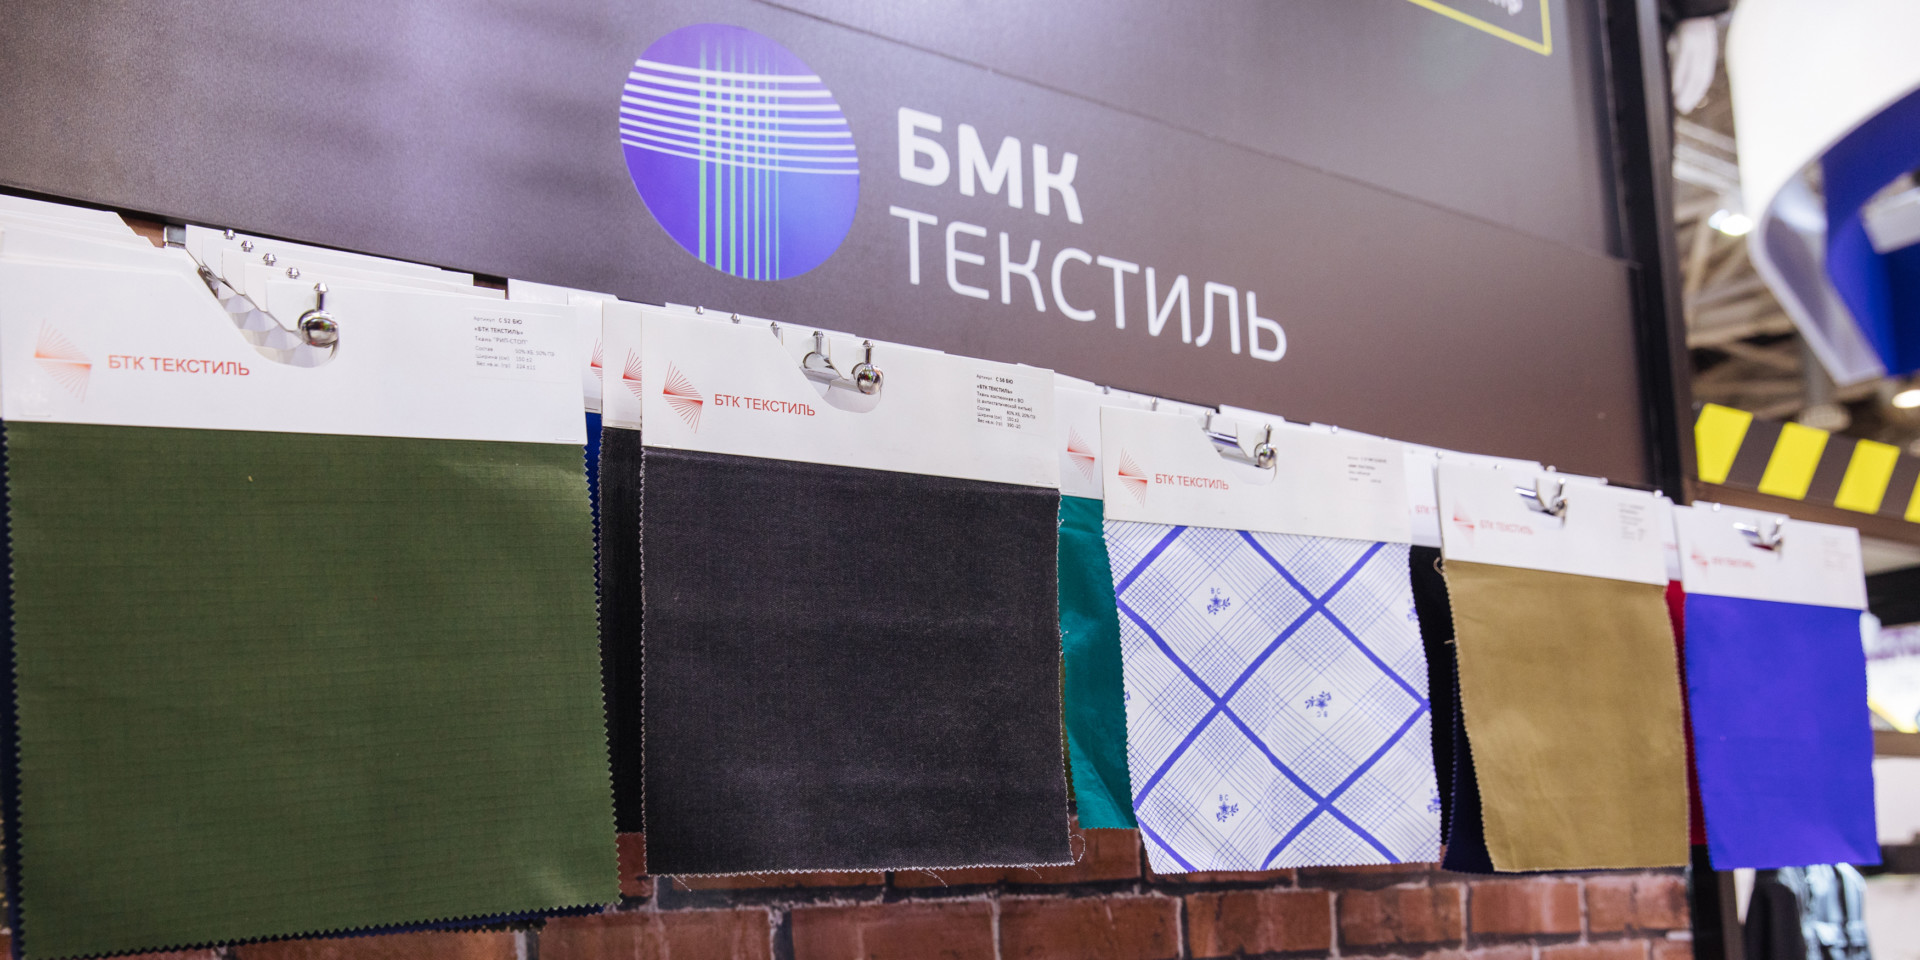 THE MODERN TEXTILE COMPLEX WILL ARISE IN THE ALTAI TERRITORY